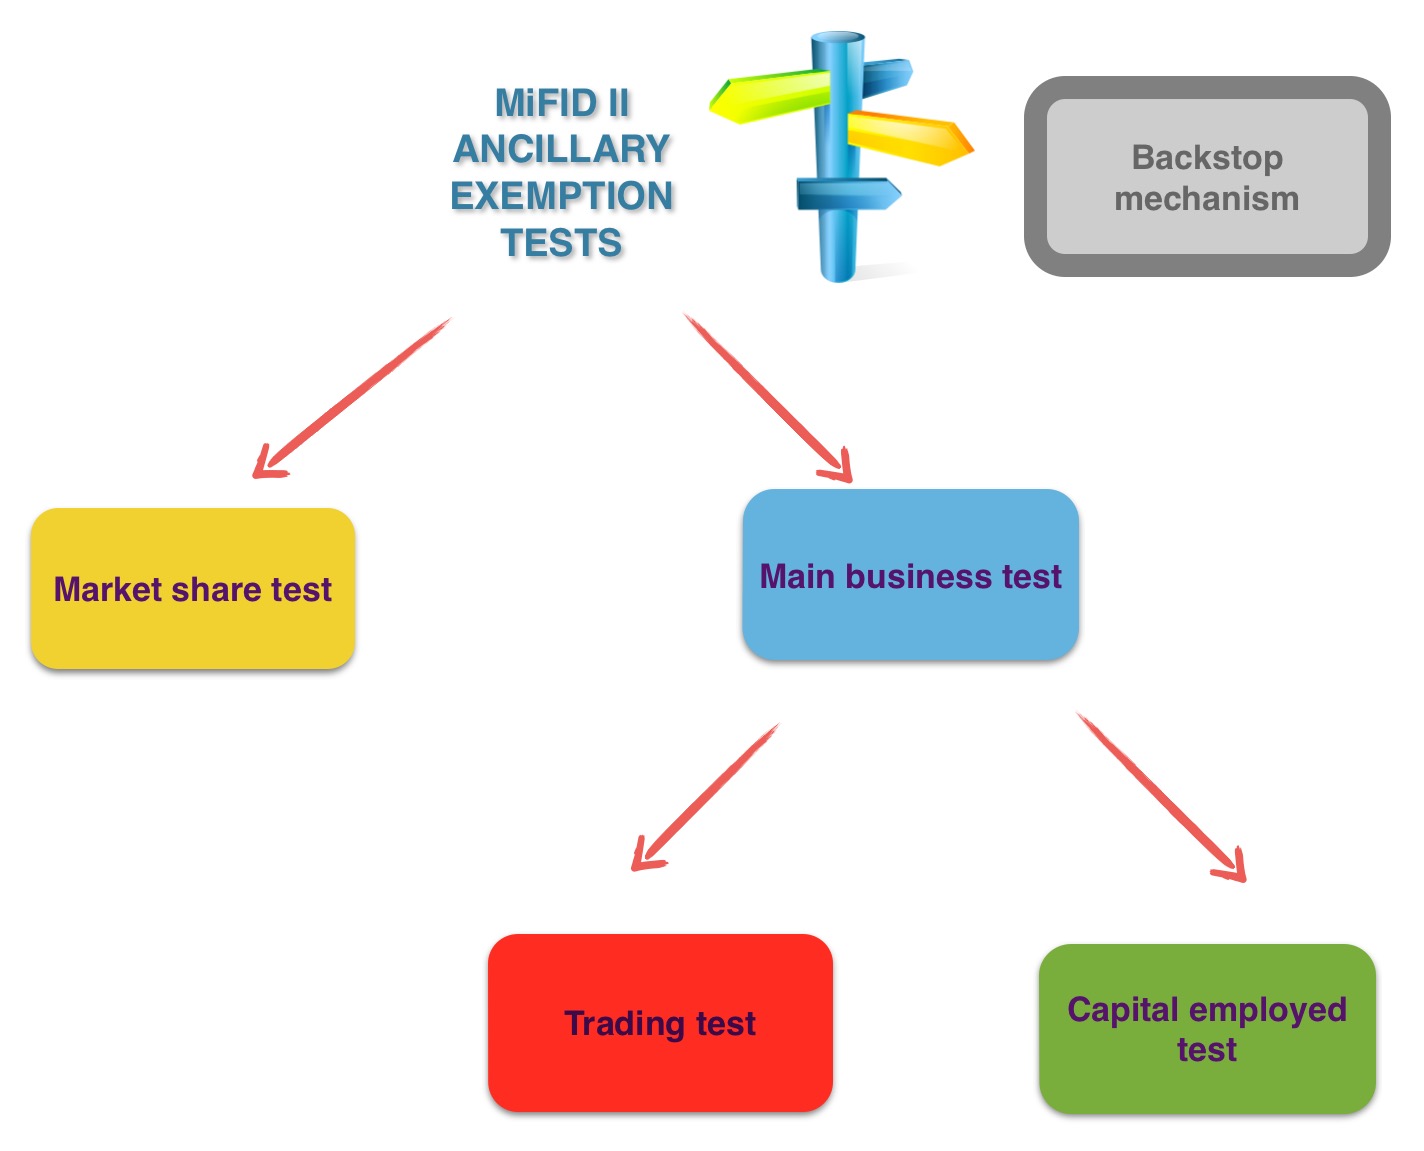 Mifid2 ancillary exemption tests structure